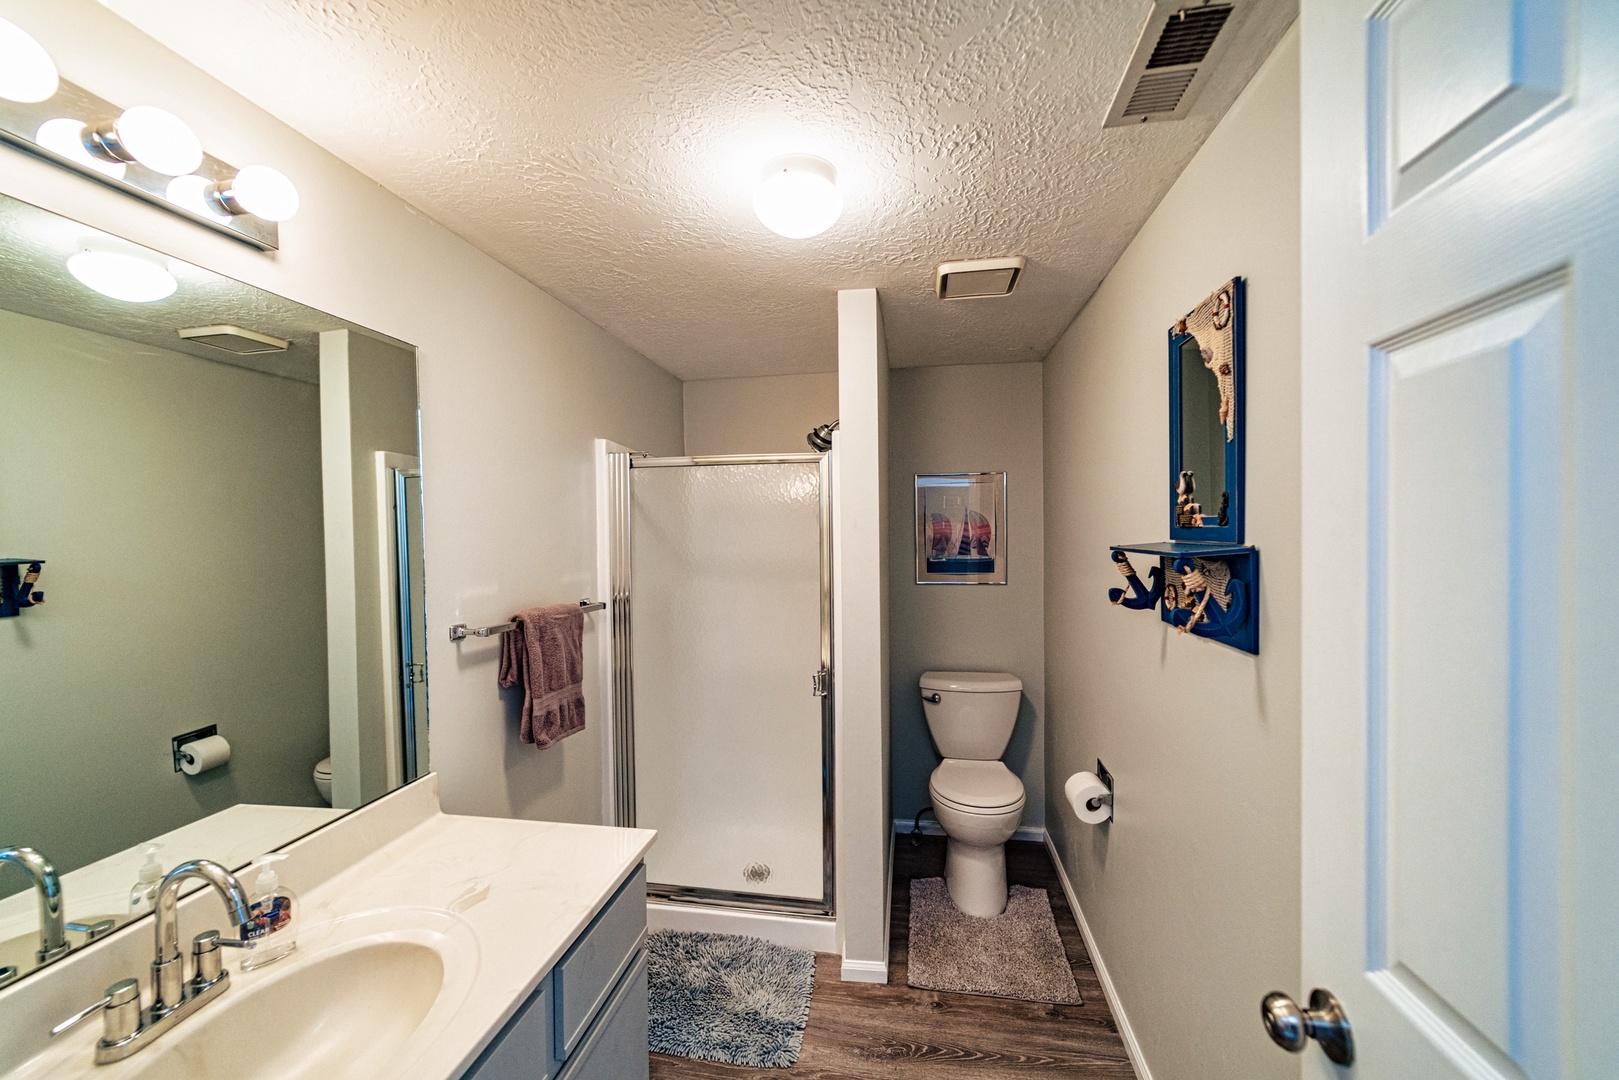 The second full bathroom offers a single vanity & glass shower